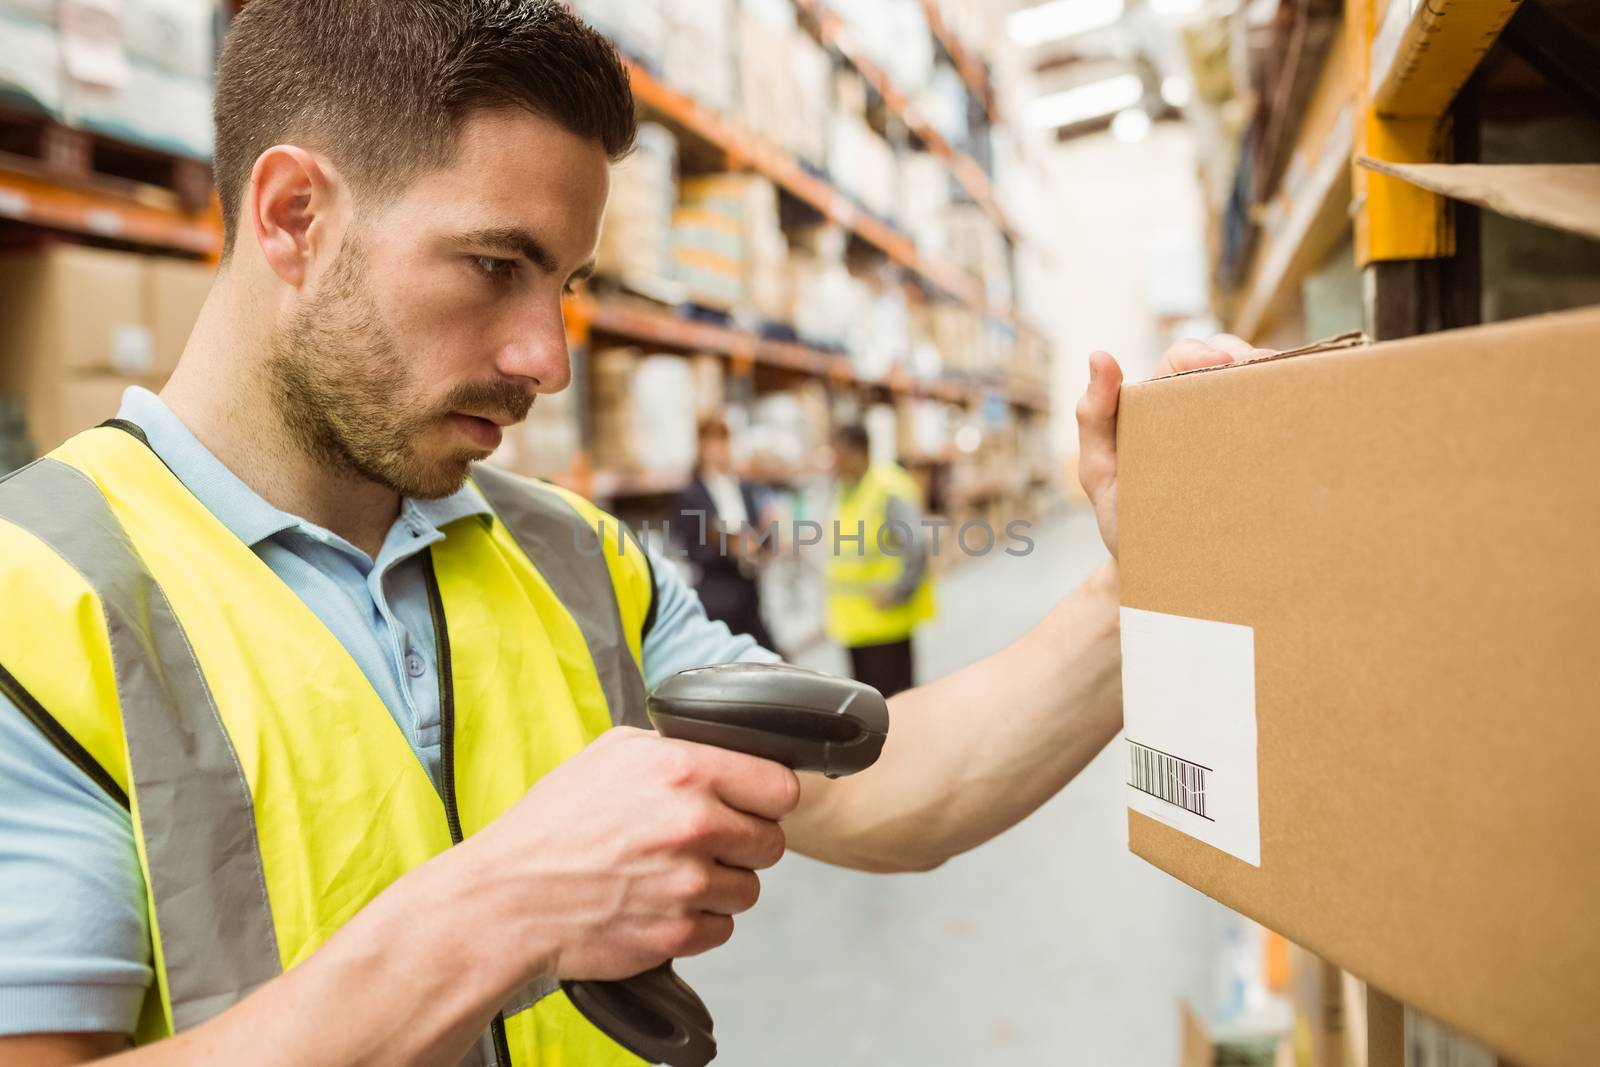 Warehouse worker scanning barcodes on boxes by Wavebreakmedia